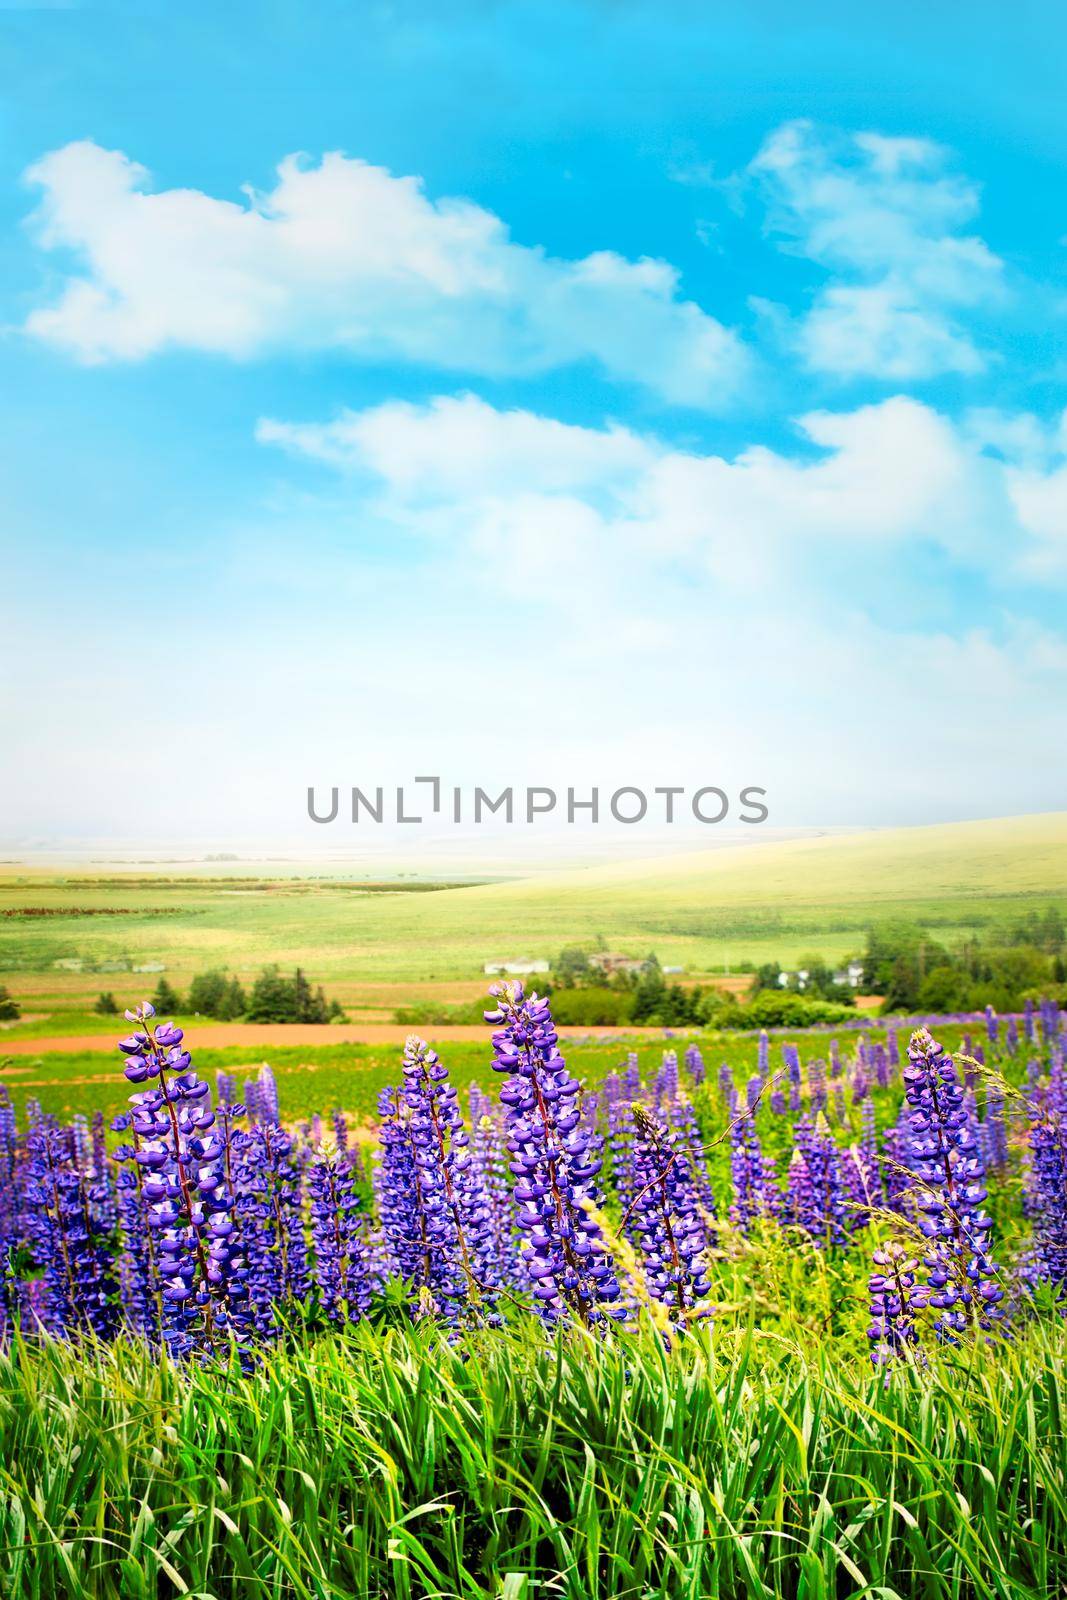 Purple flowers in tall grass against a summer sky